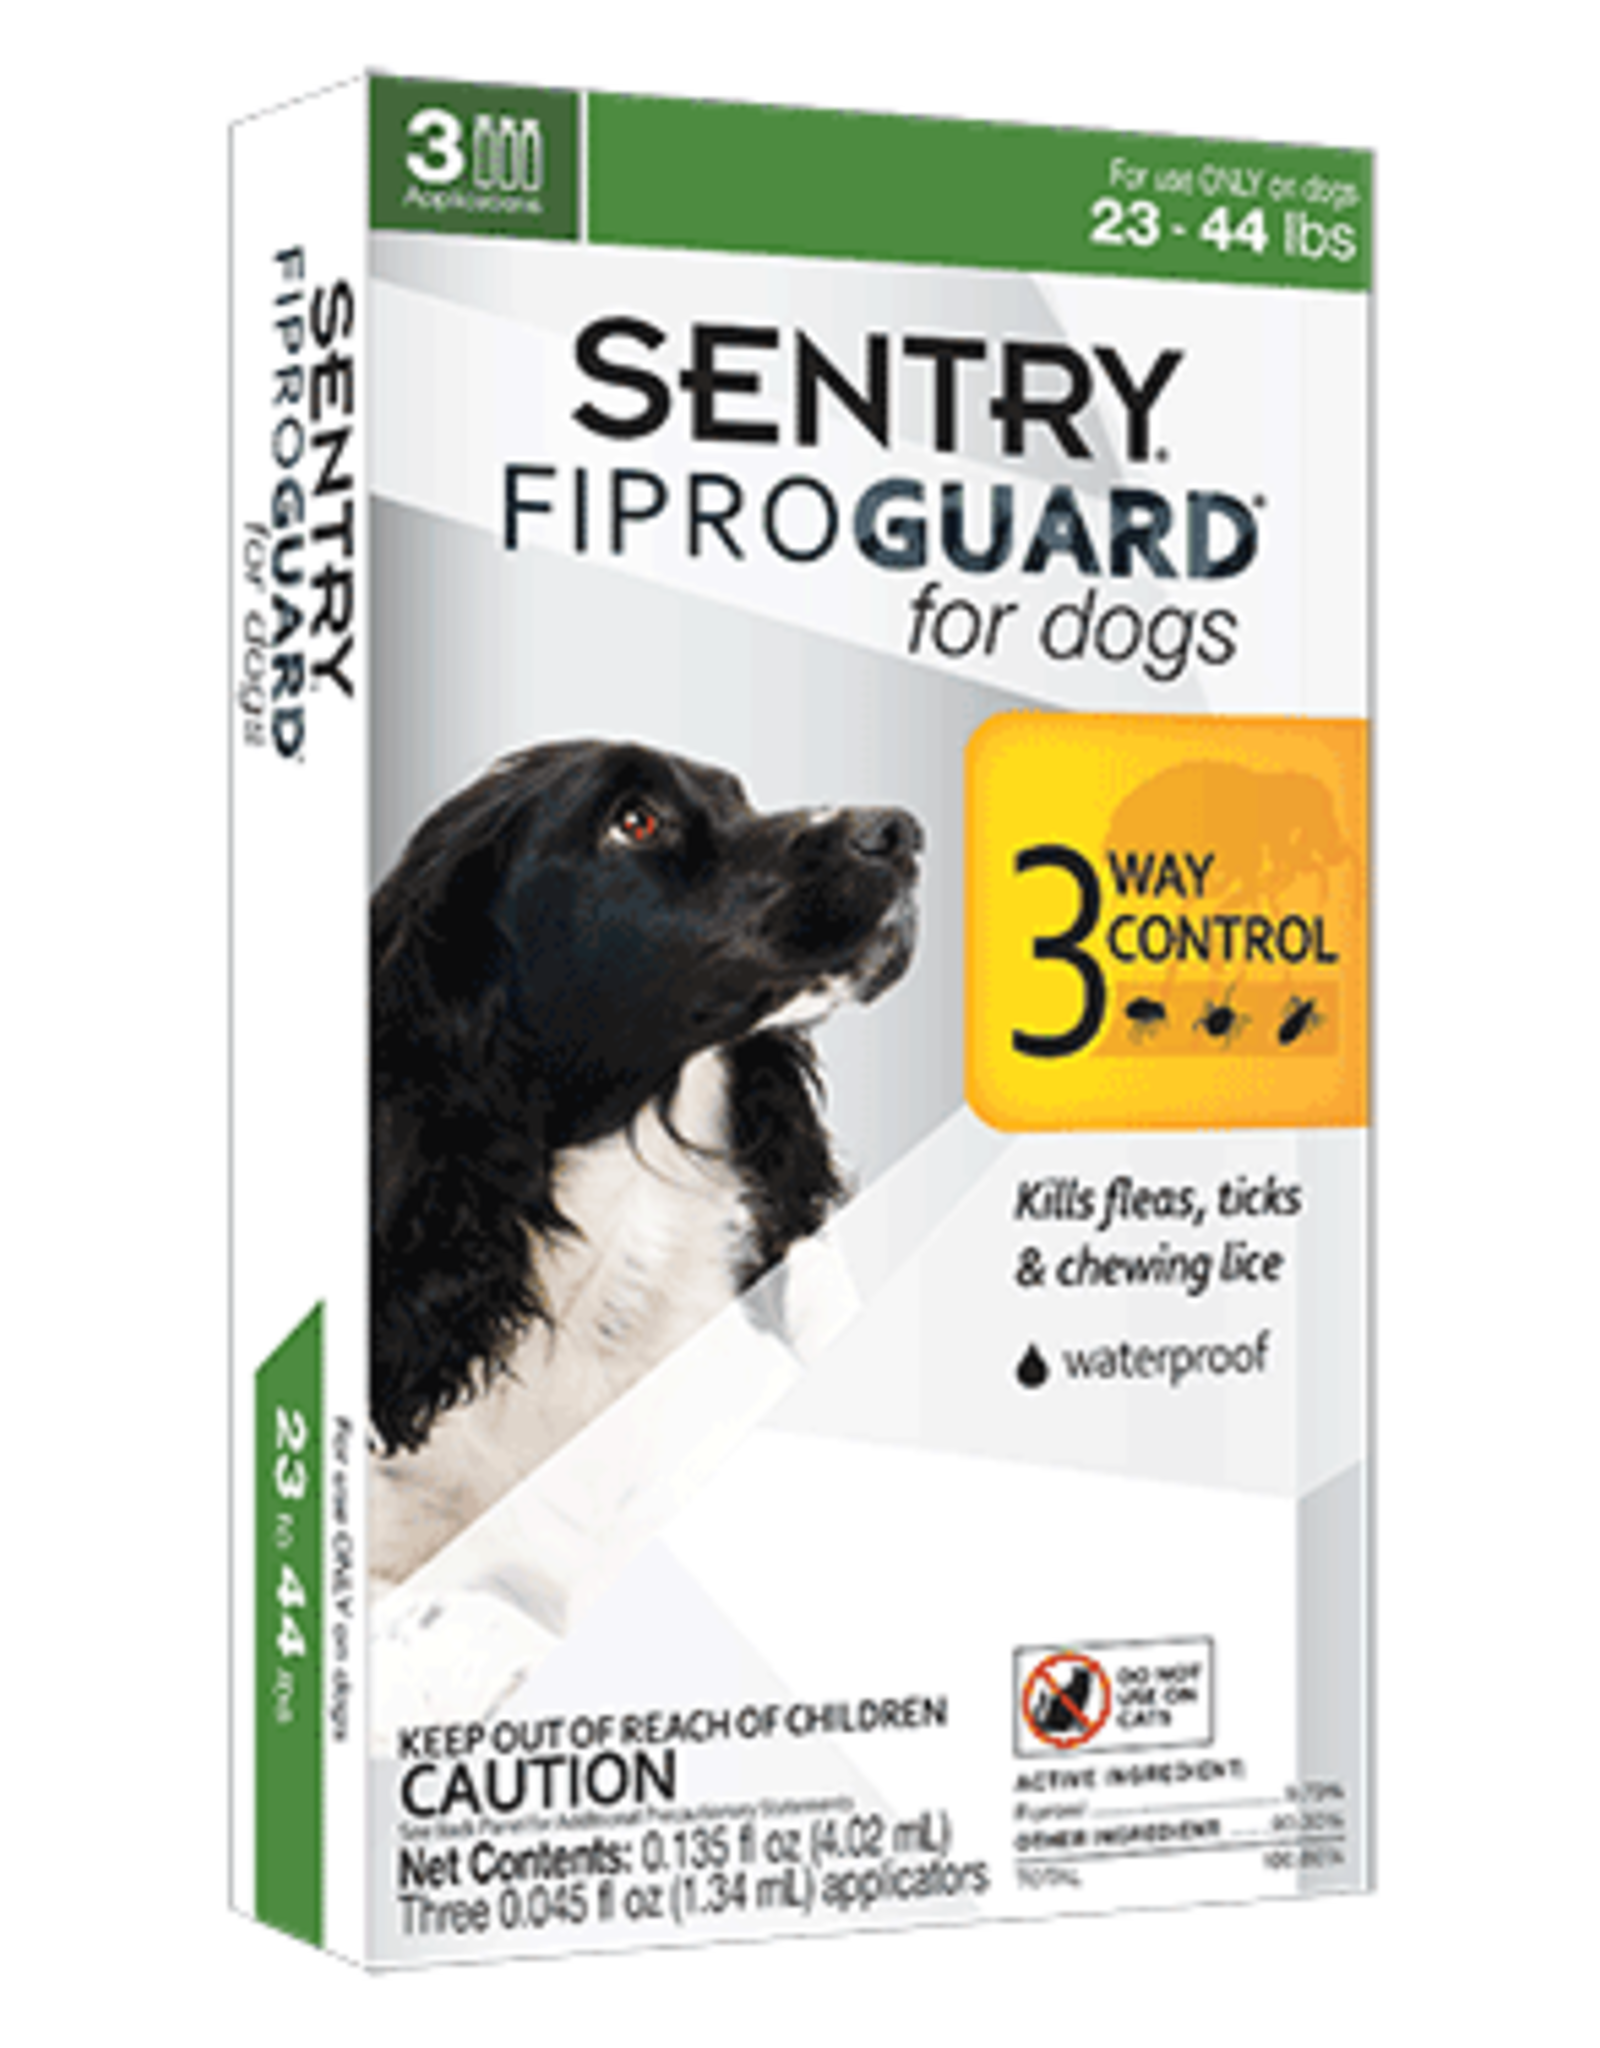 SENTRY Sentry Fiproguard | Topical Flea and Tick treatment